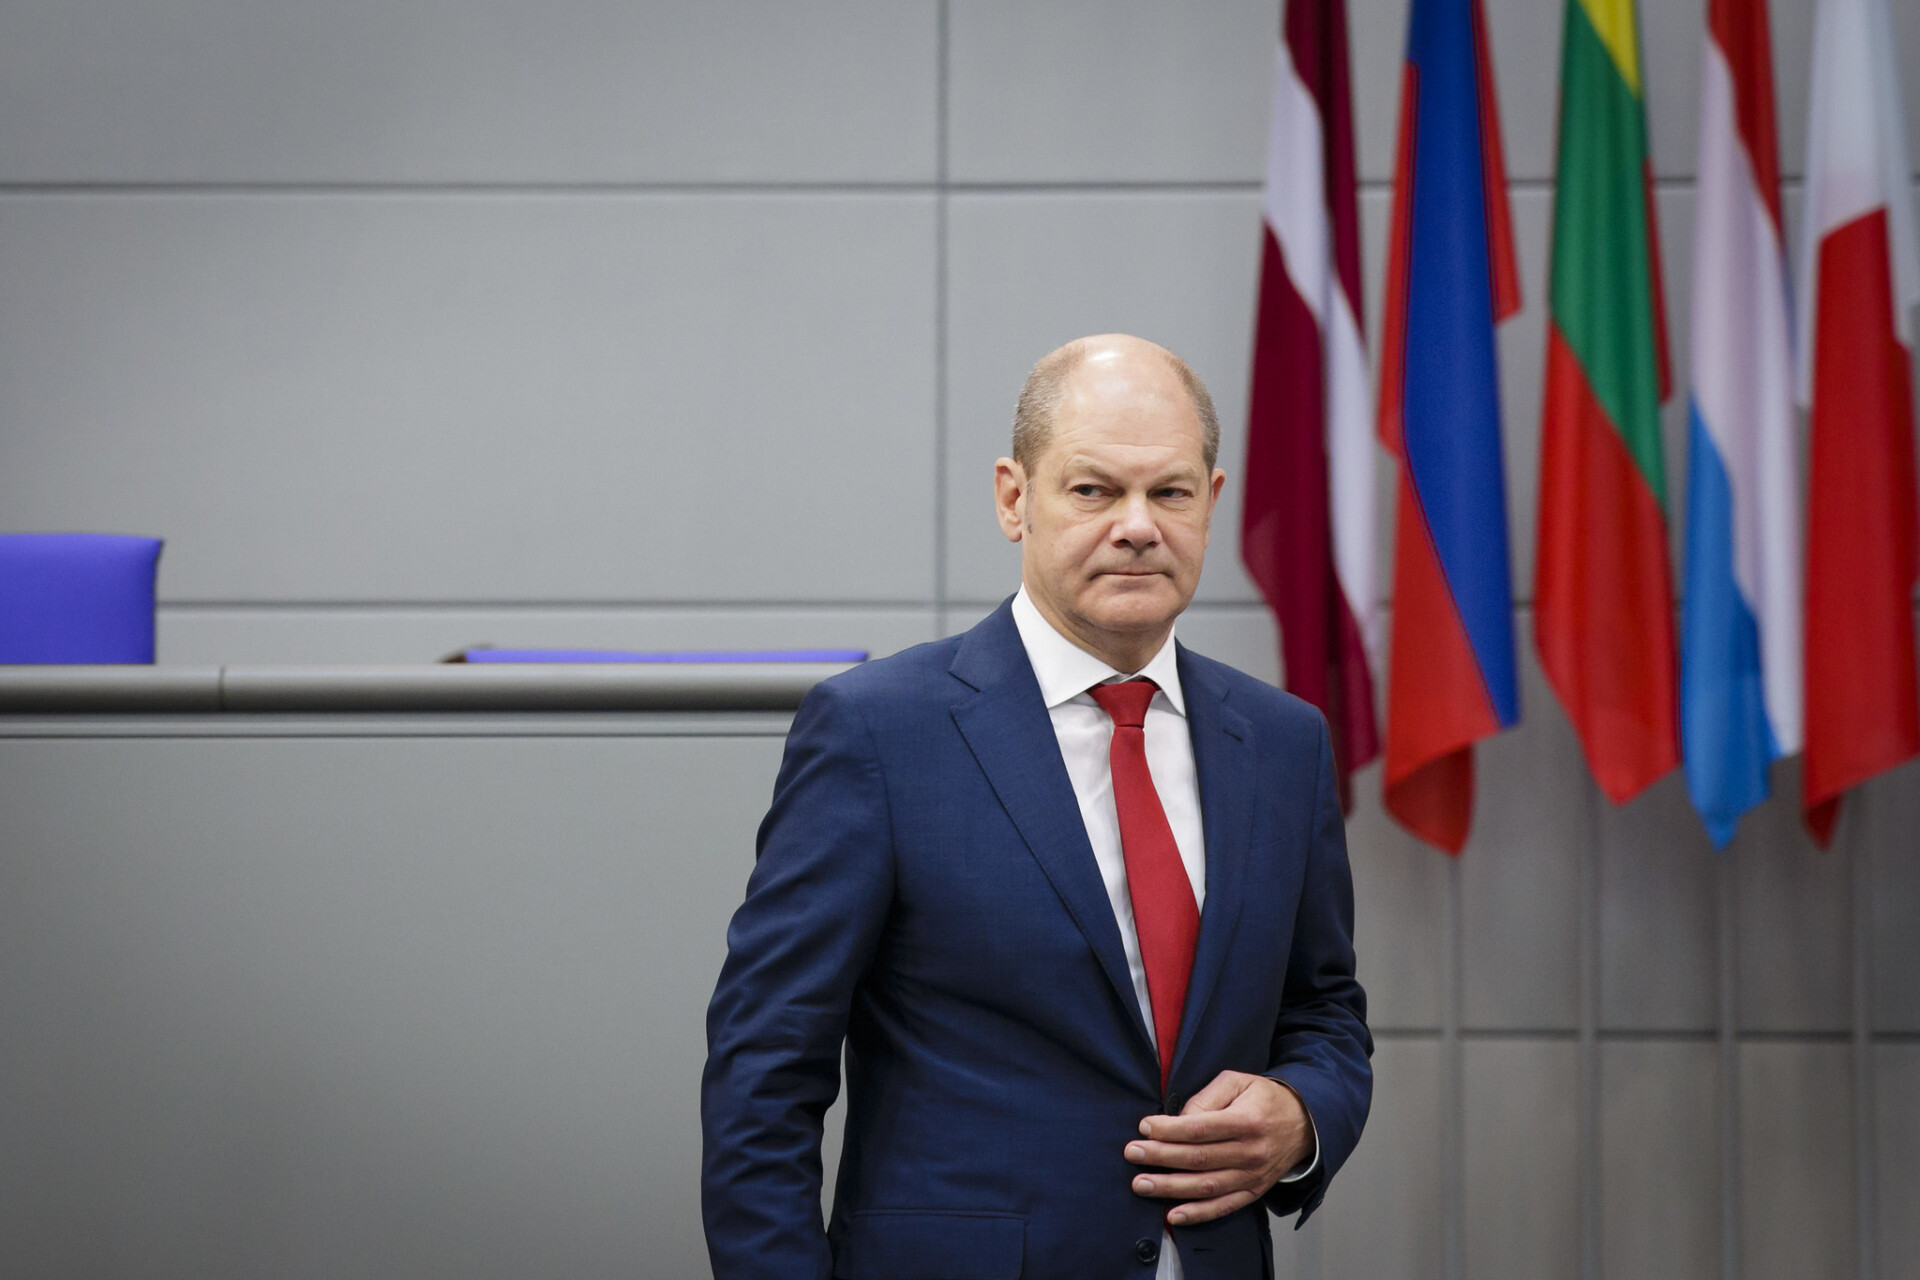 Archivbild: "Olaf Scholz, Vice-Chancellor and Federal Minister of Finance, Germany, Plenary Session, Berlin, 8 July 2018" by oscepa is licensed under CC BY-SA 2.0. (cropped)